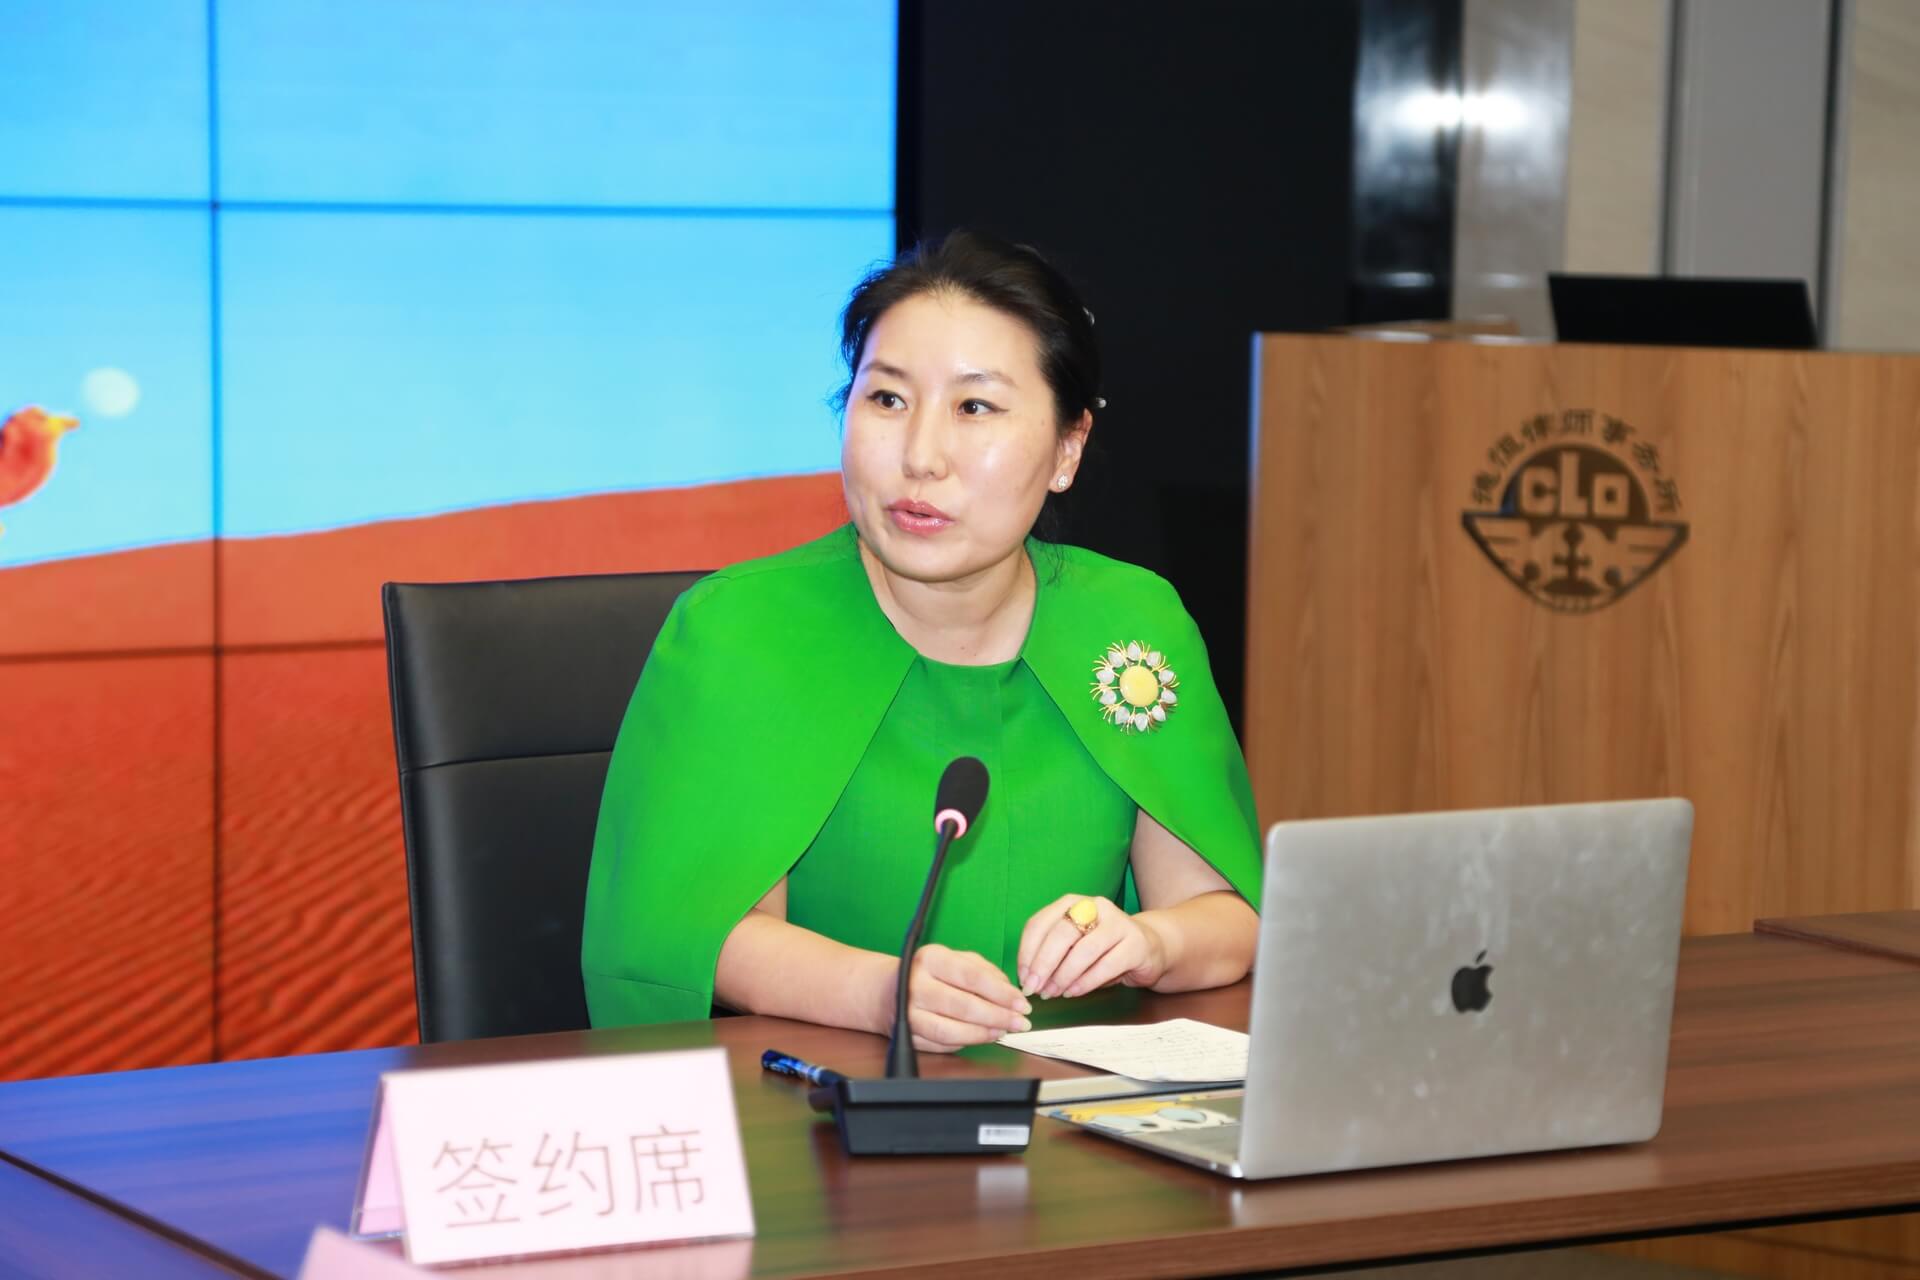 President of Bank of Asia Lisa Lou Spoke about the Bank’s Role and Contribution to Belt and Road Service Connections.